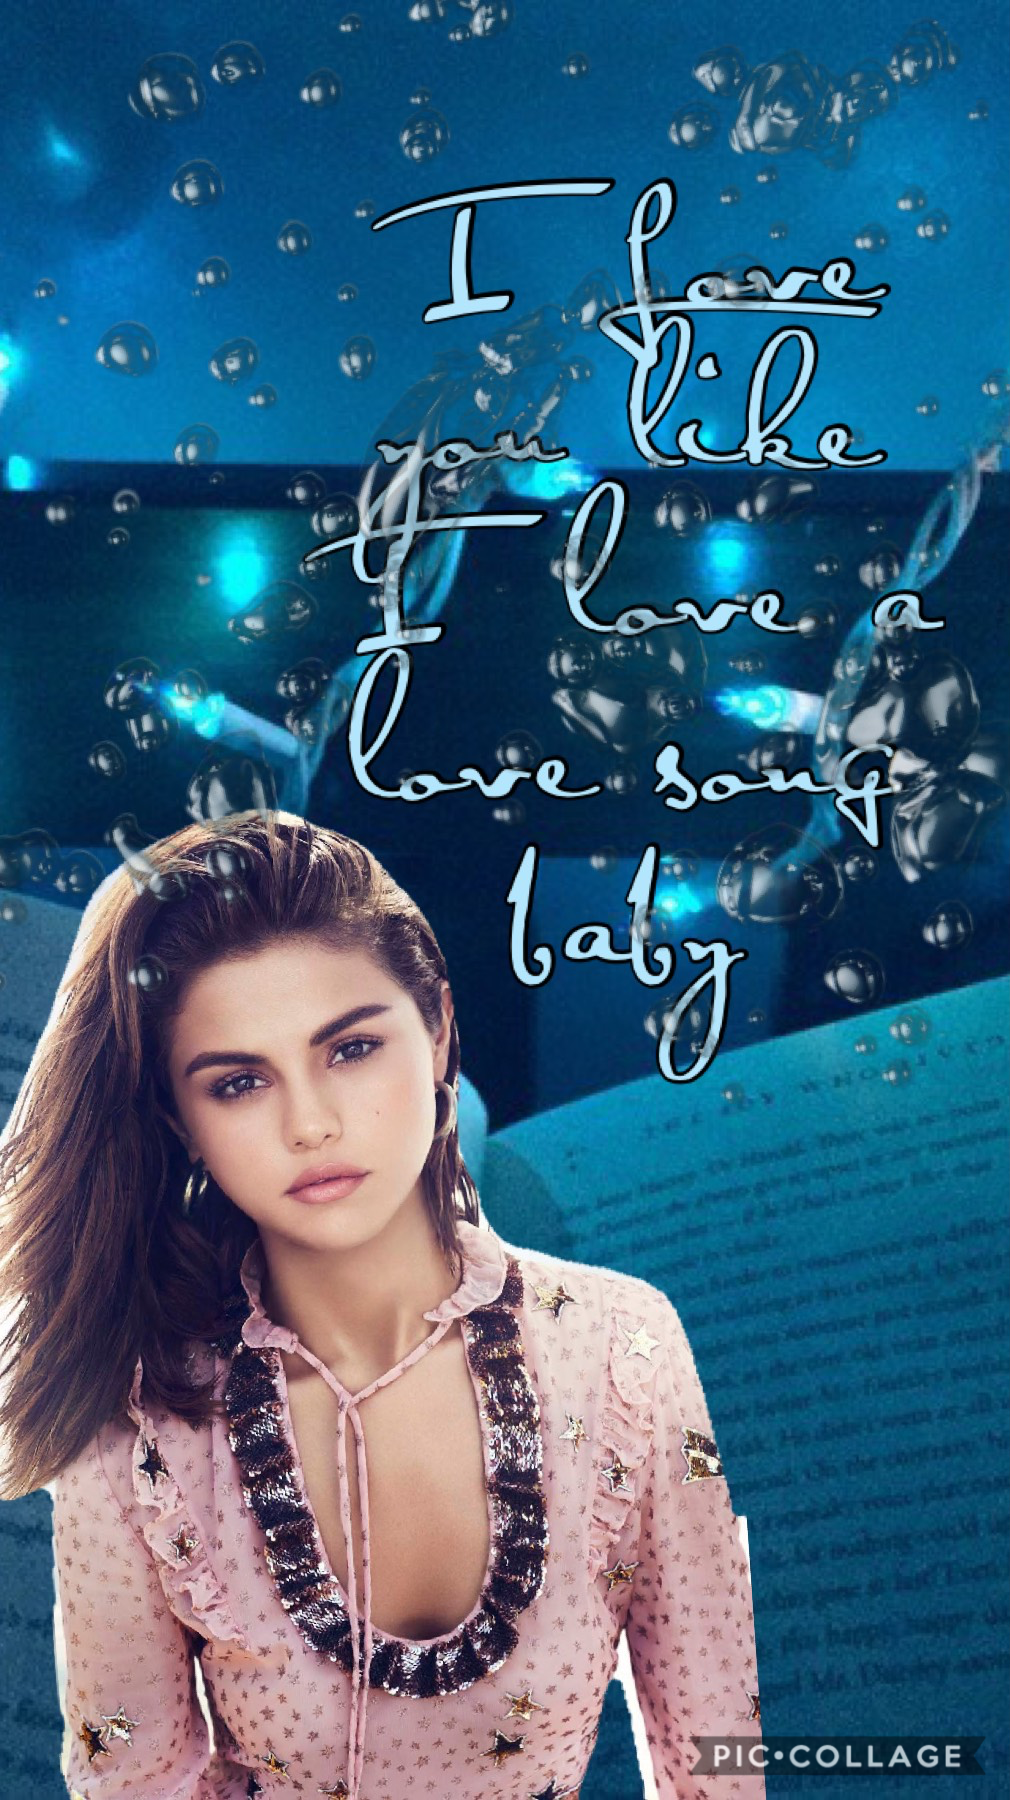 Tippity Tap! 
I just posted another collage. But this song was in my head. And Selena Gomez is so pretty and such an inspiration! So ya! 